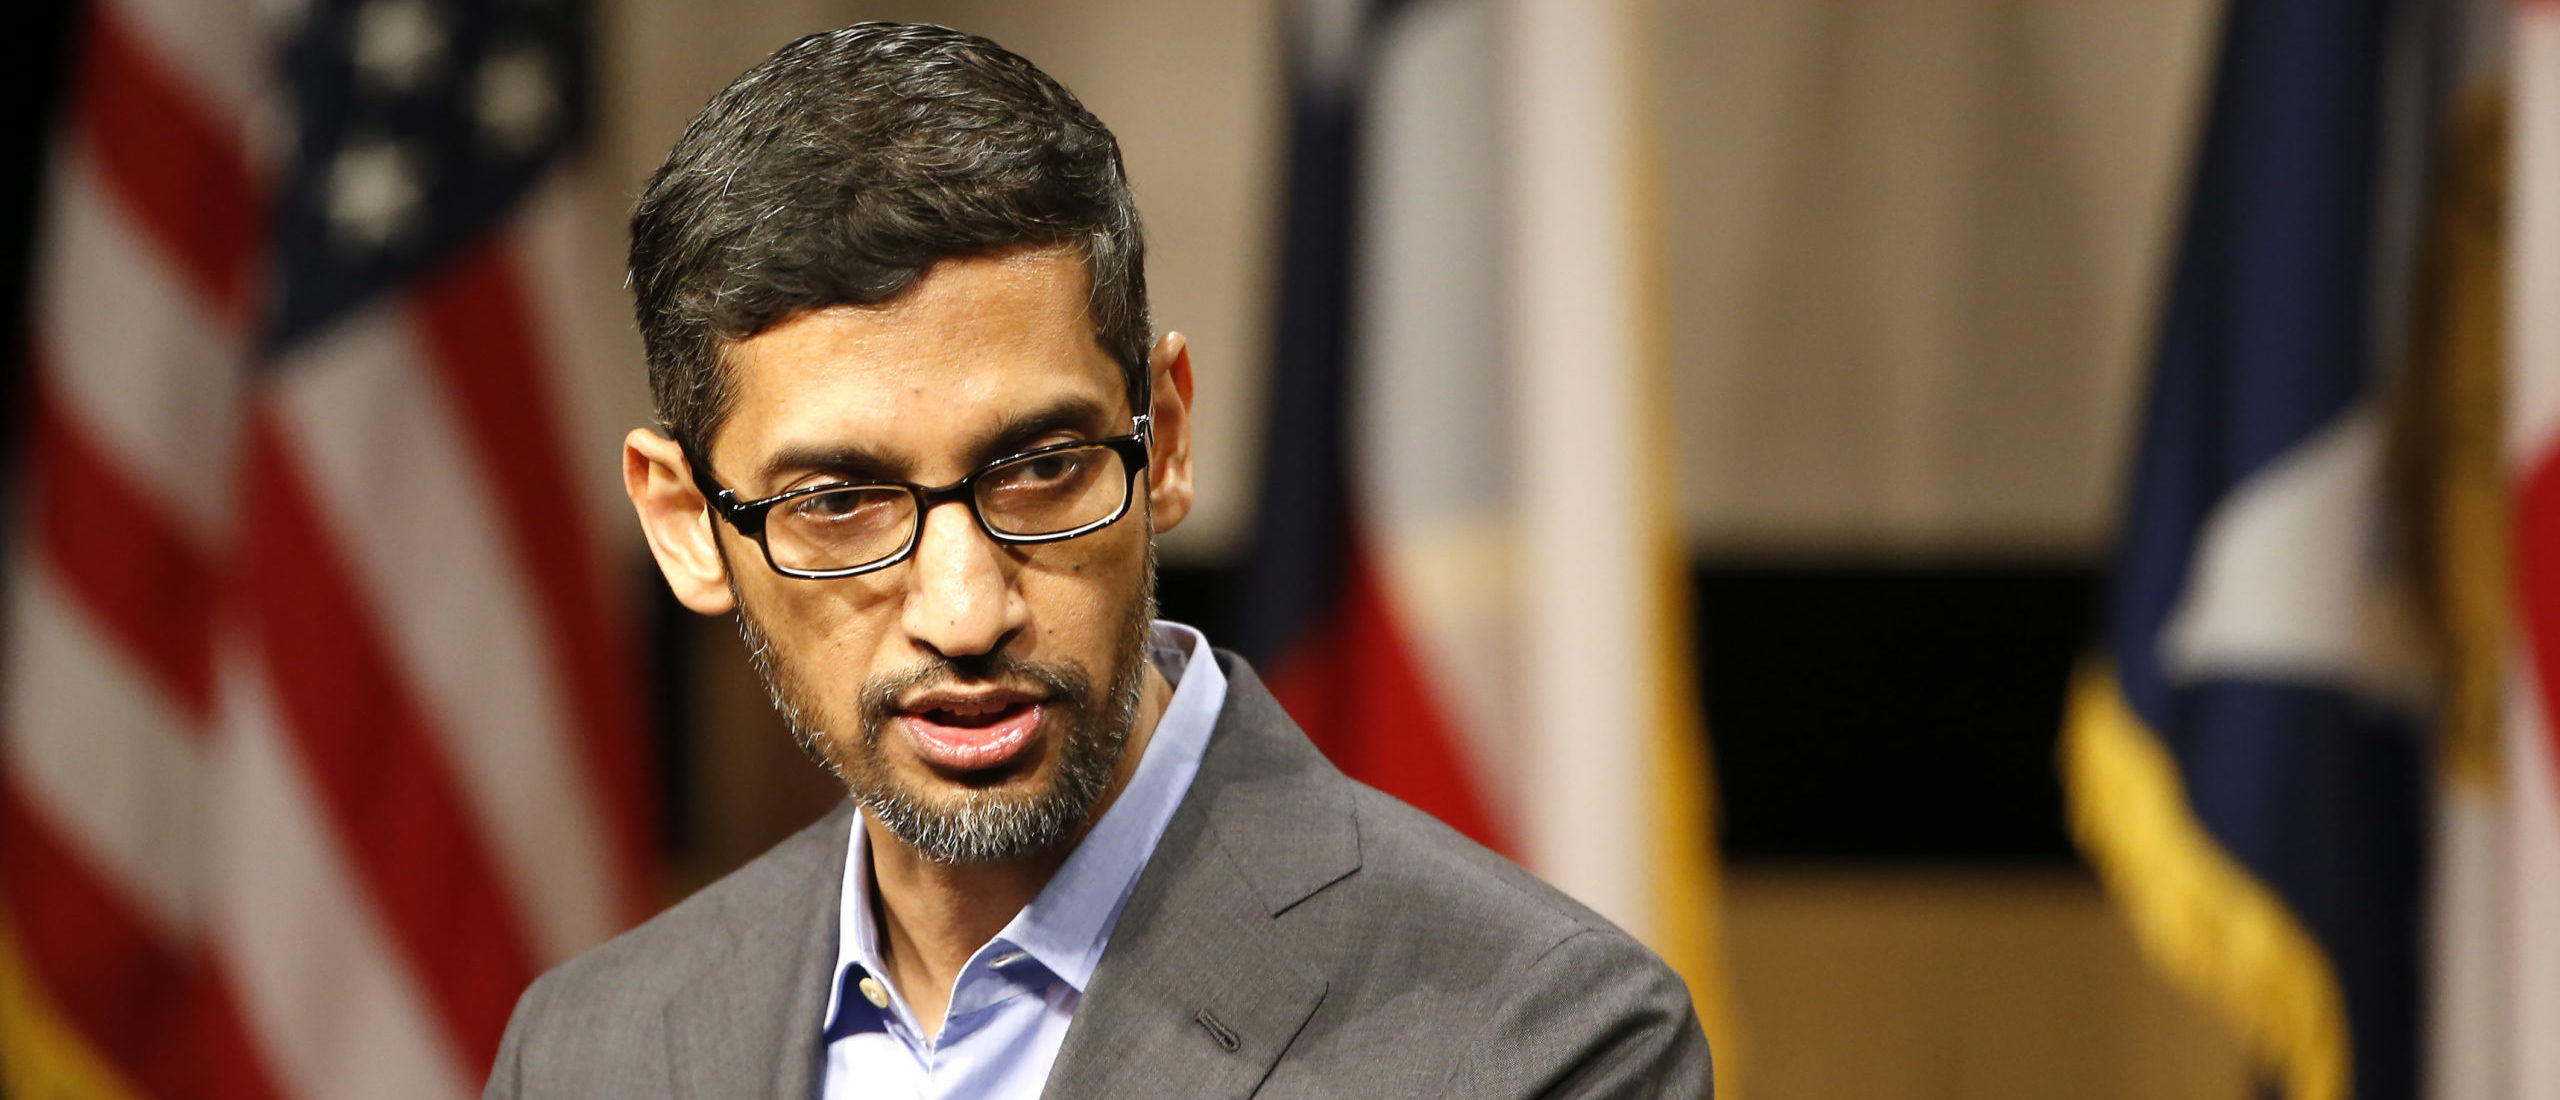 DALLAS, TX - OCTOBER 03: CEO of Google, Sundar Pichai, speaks before signing the White Houses Pledge To Americas Workers at El Centro community college on October 3, 2019 in Dallas, Texas. Google announced that it is committing to a White House initiative designed to get private companies to expand job training. (Photo by Ron Jenkins/Getty Images)